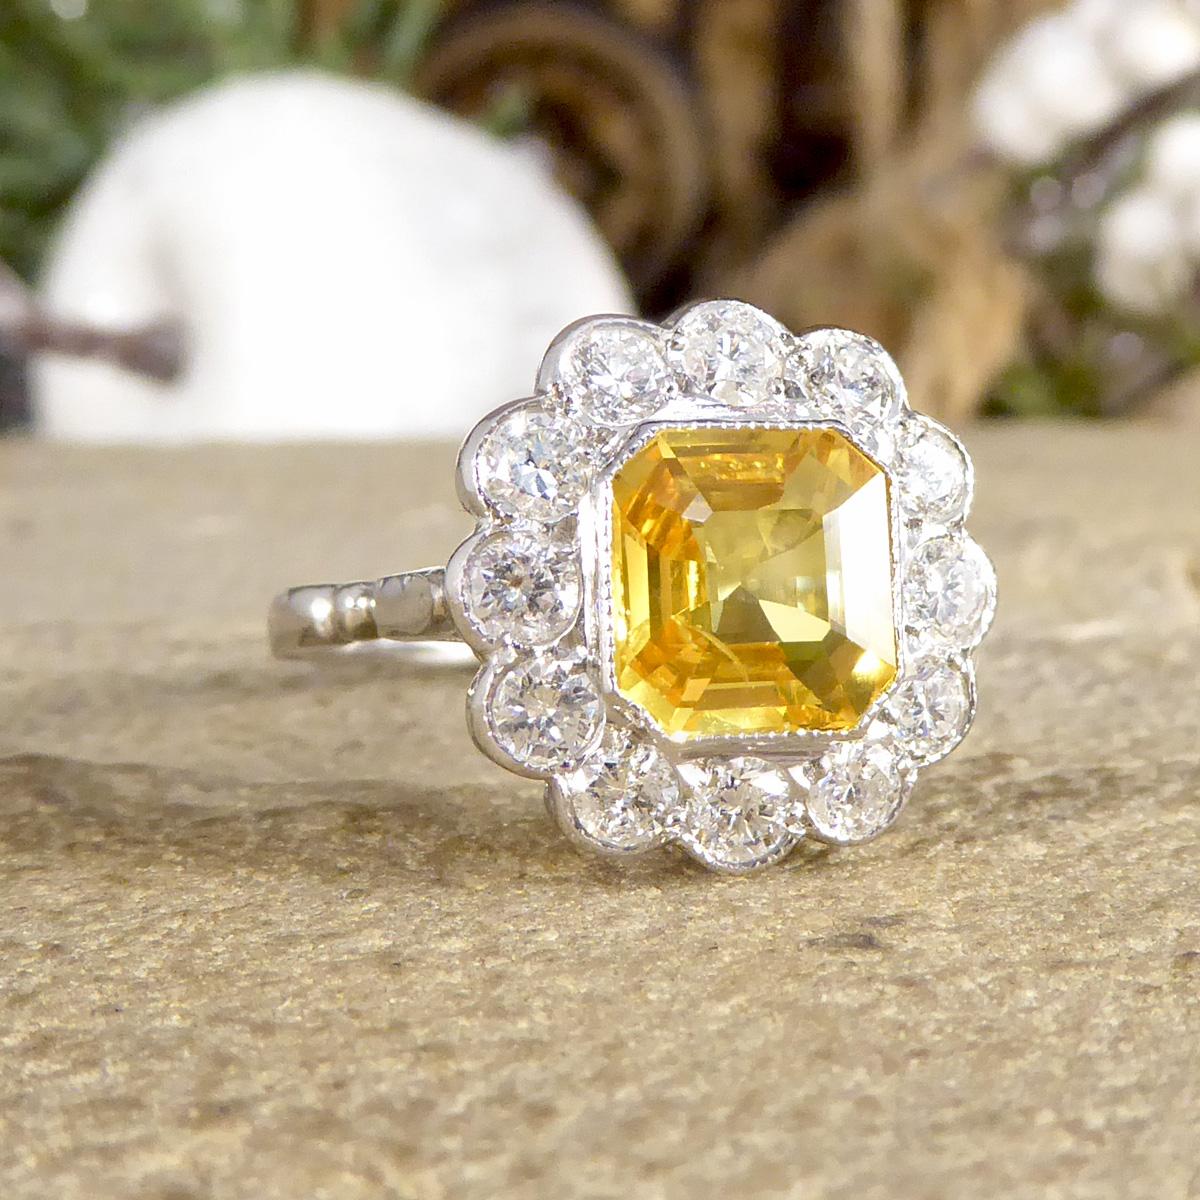 This fabulous Contemporary cluster ring dazzles on the hand with a beautifully coloured Yellow Sapphire featuring in the centre. The Asscher Cut Yellow Sapphire stone weighing 2.10ct is surrounded by a total of 0.90ct bright Brilliant cut Diamonds.